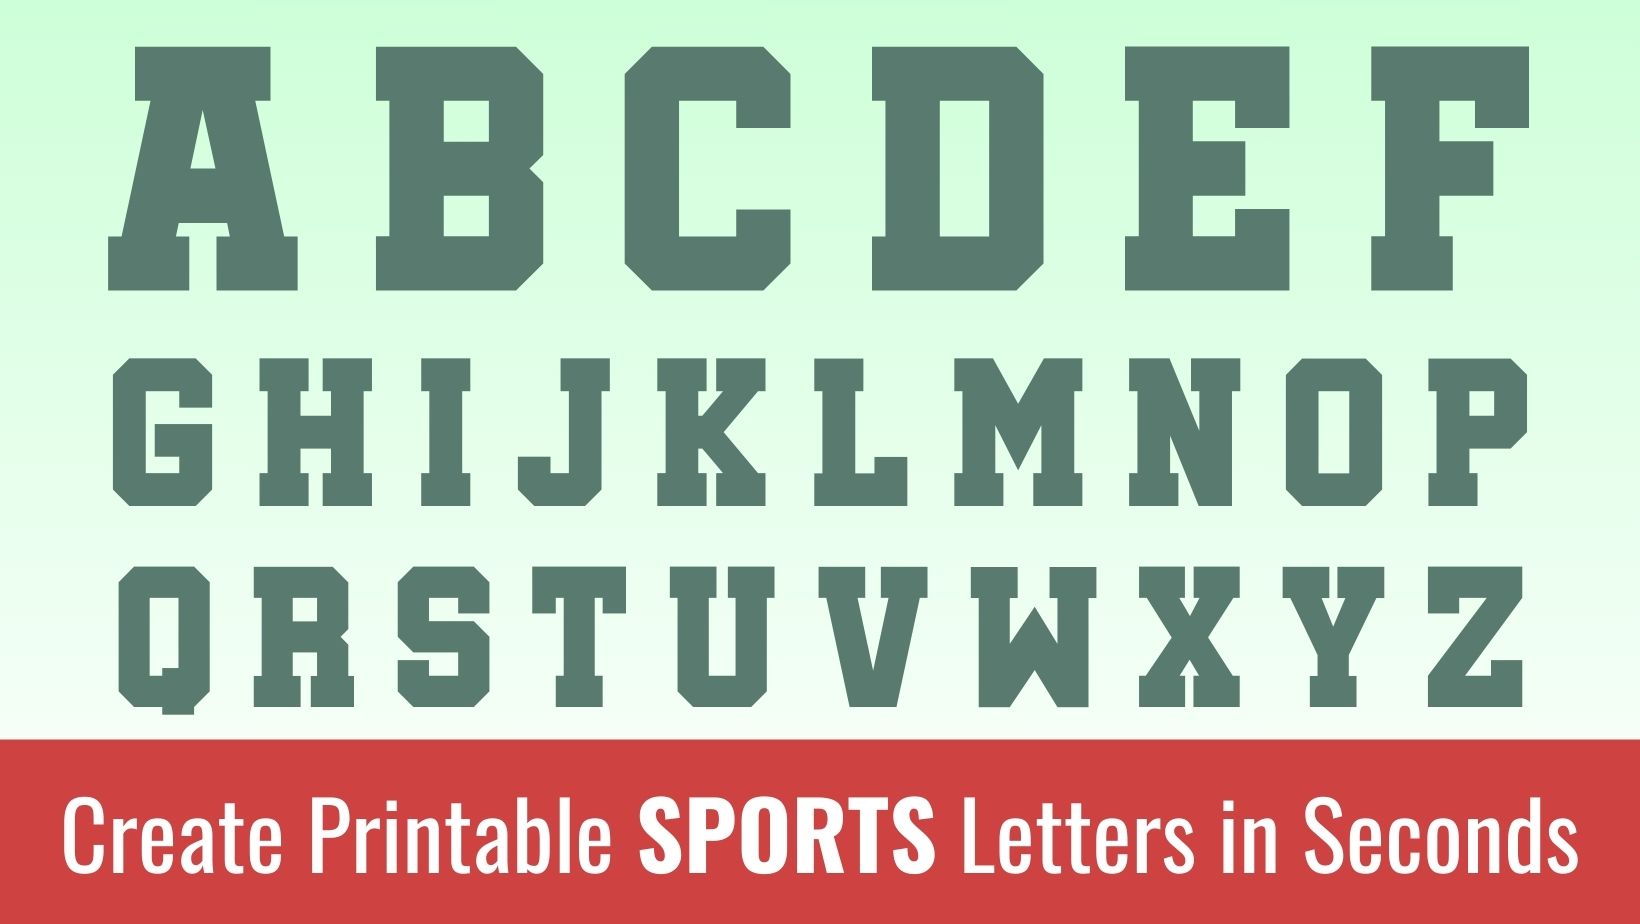 Printable sports Letters: Free Alphabet Font and Letter Templates